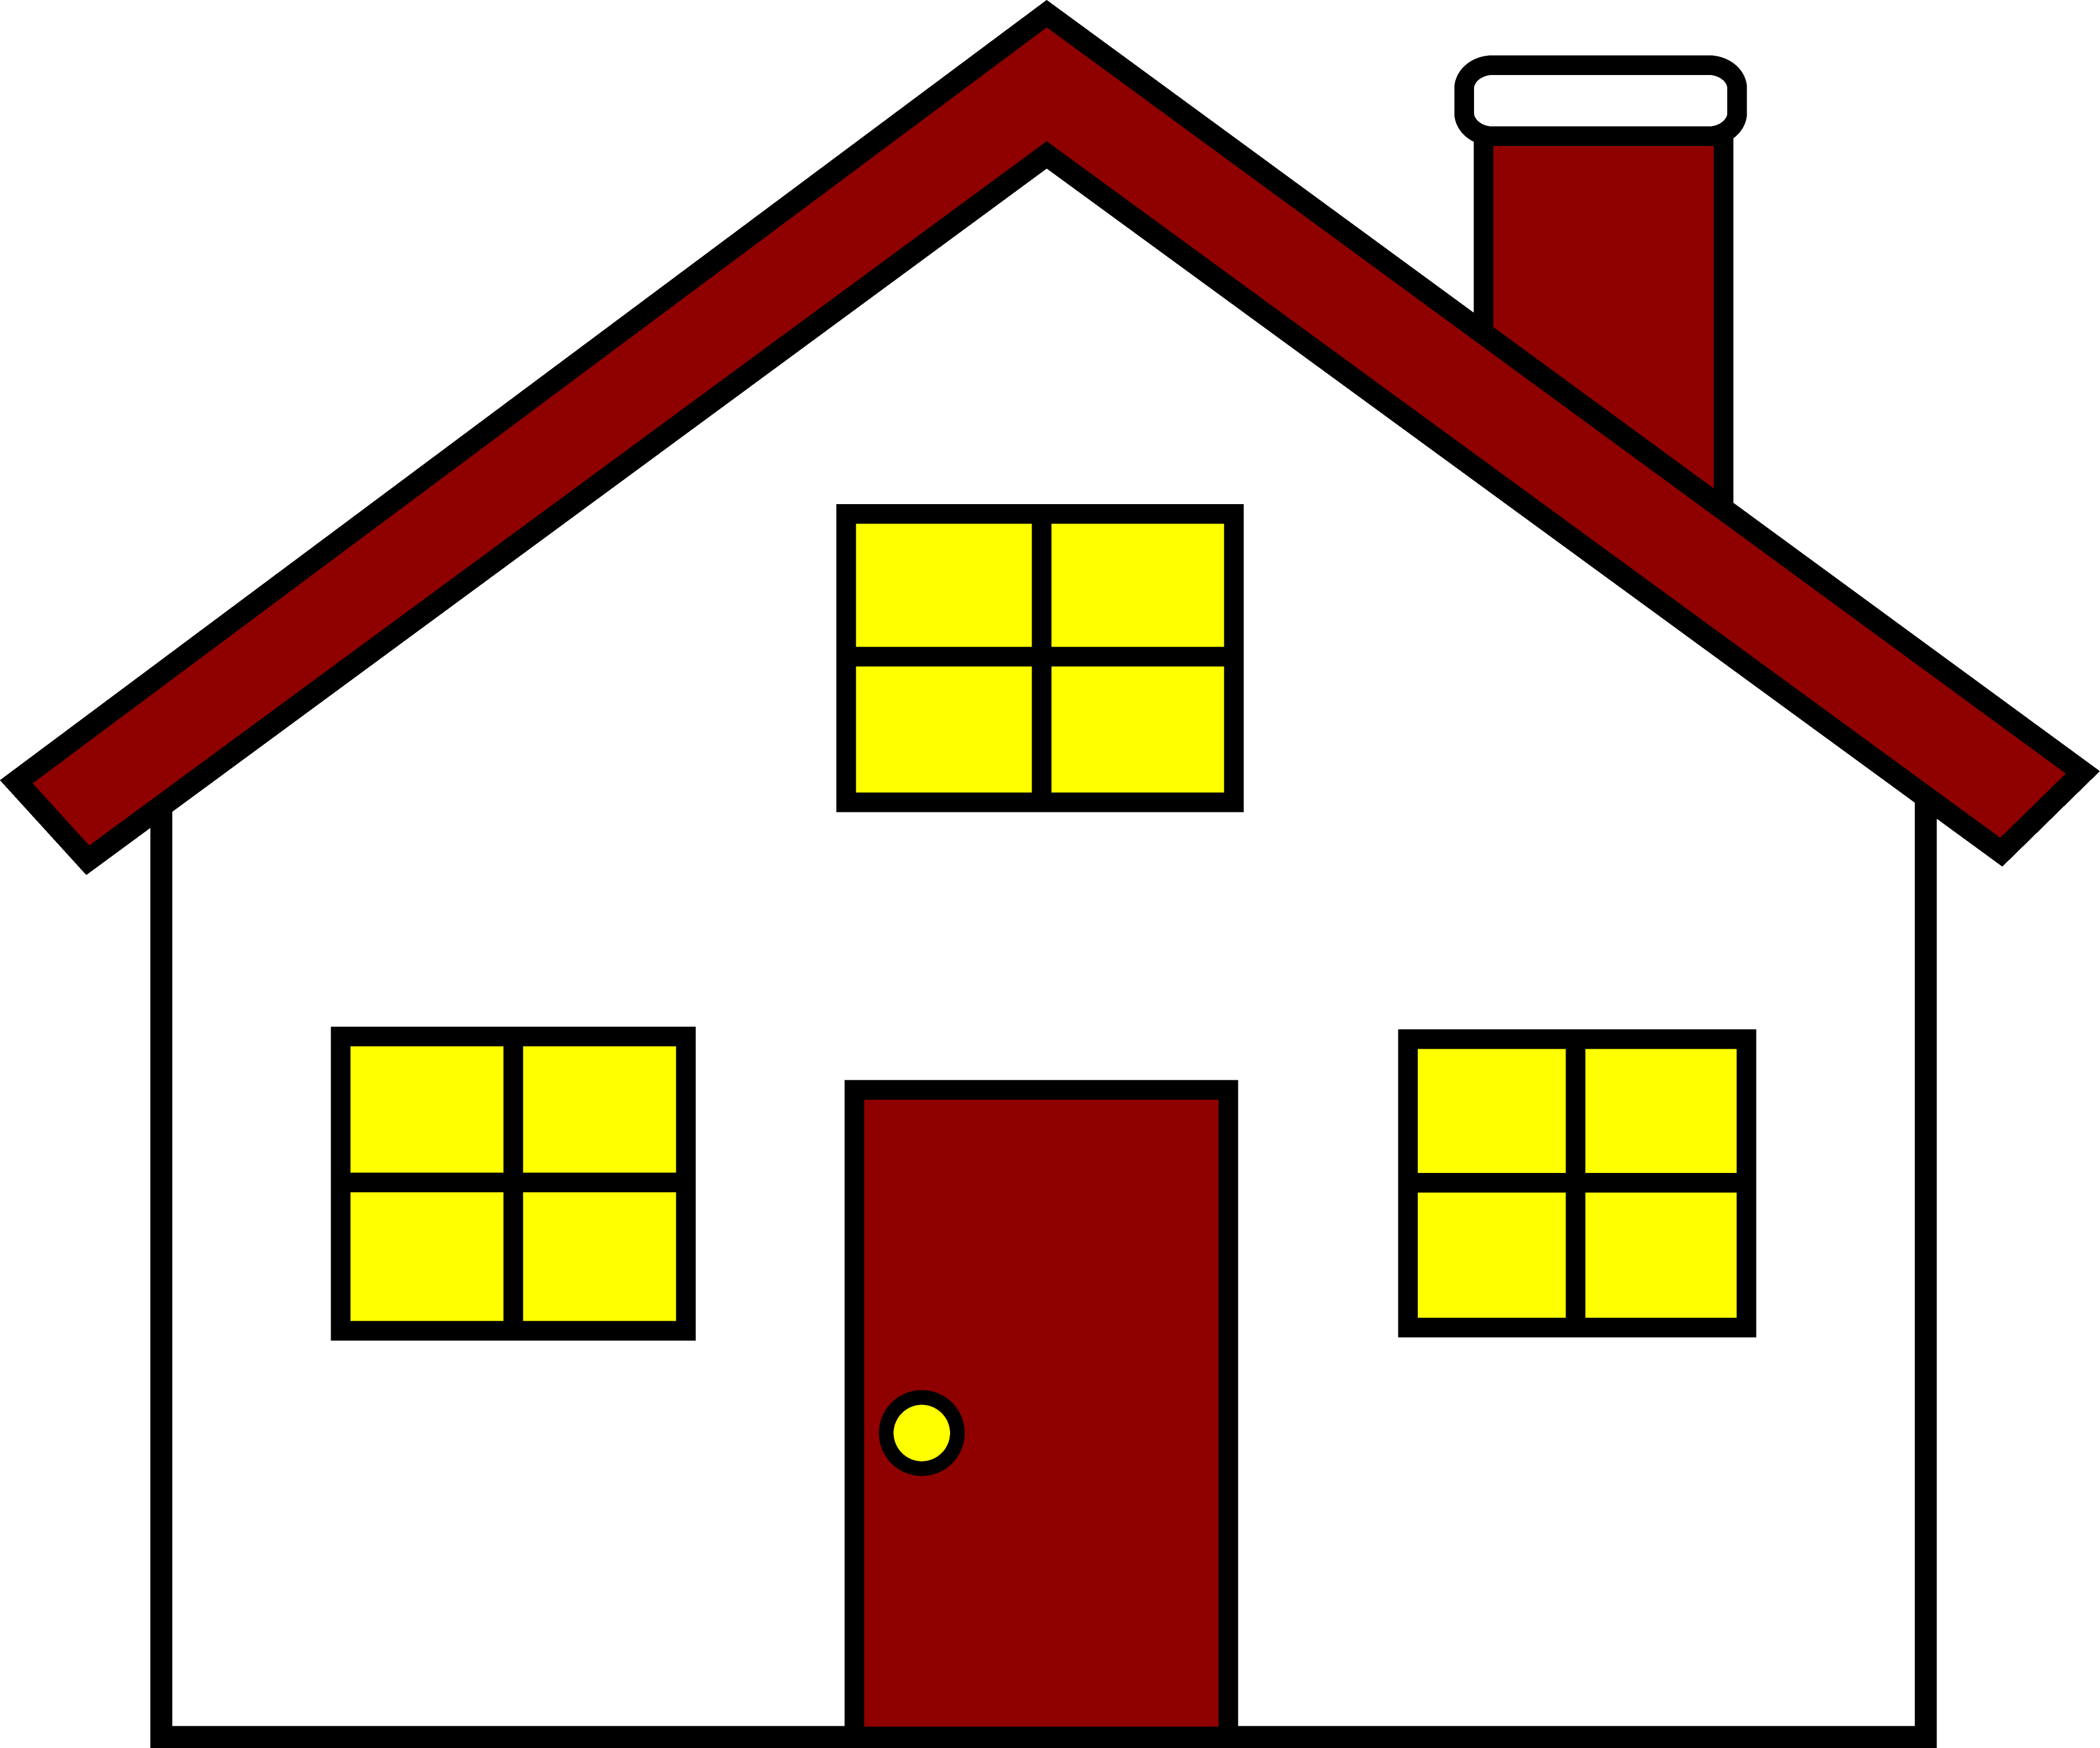 Baby Houses Clip Art High Res